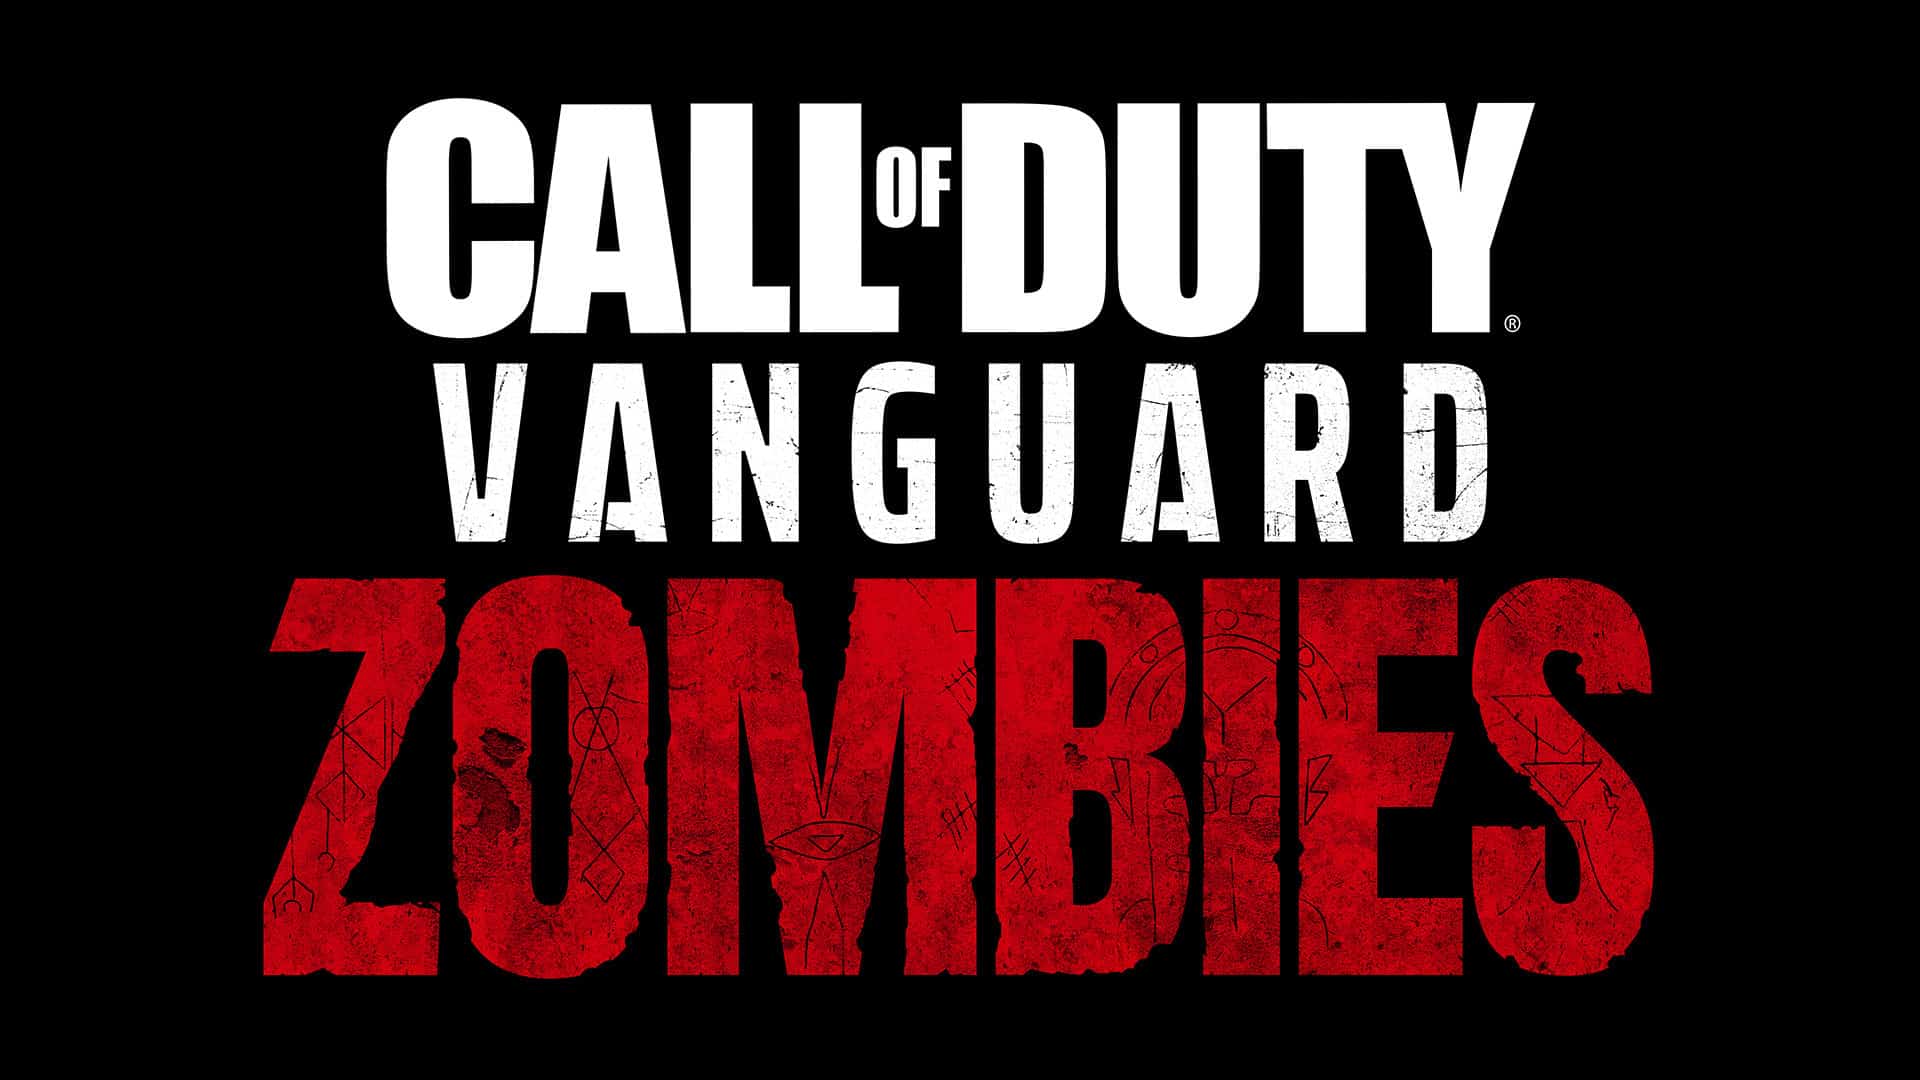 Call of Duty: Vanguard to reveal new Zombies mode details tomorrow